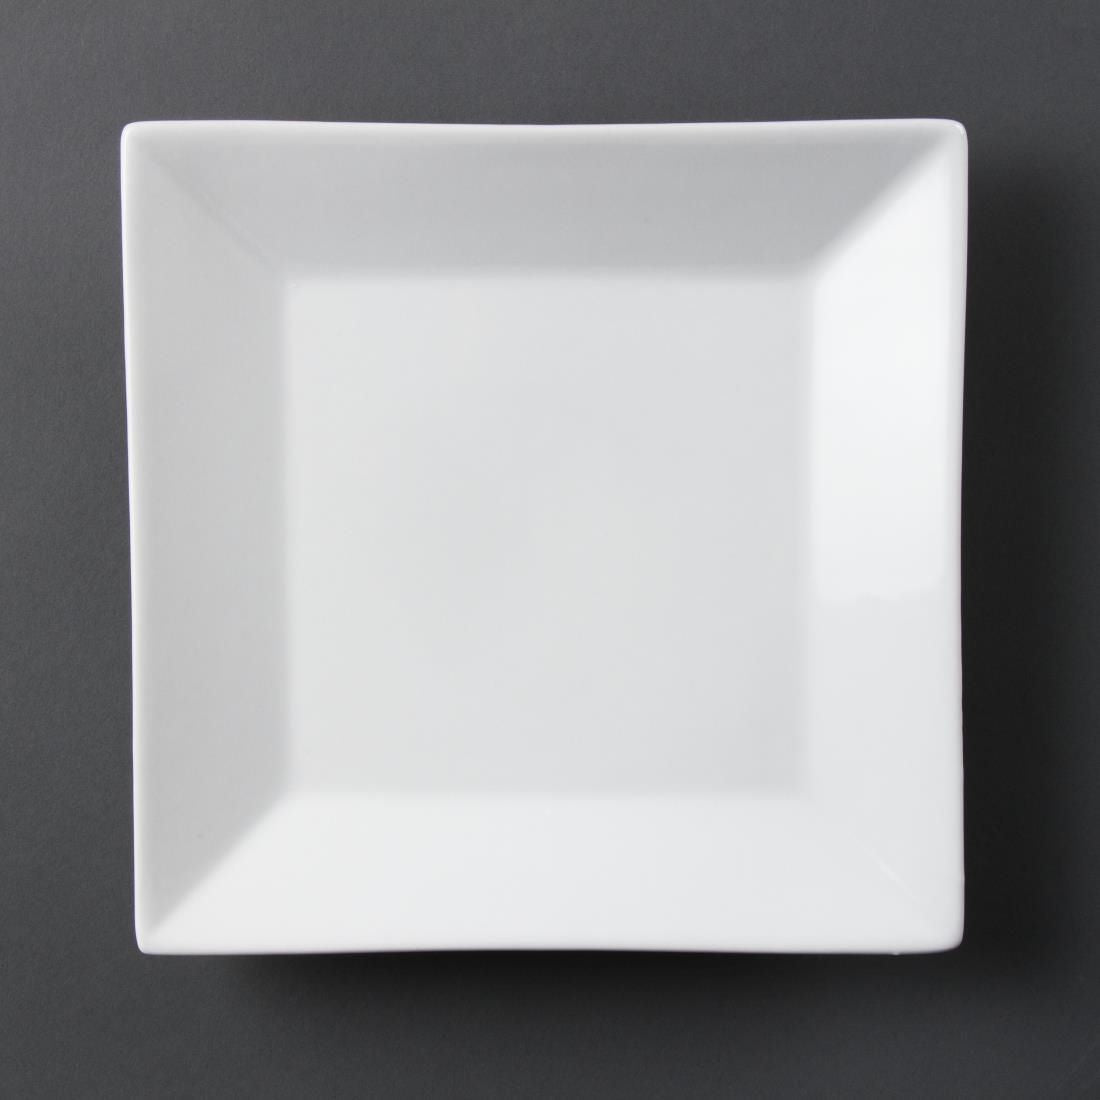 C360 Olympia Whiteware Square Plates Wide Rim 250mm (Pack of 6)